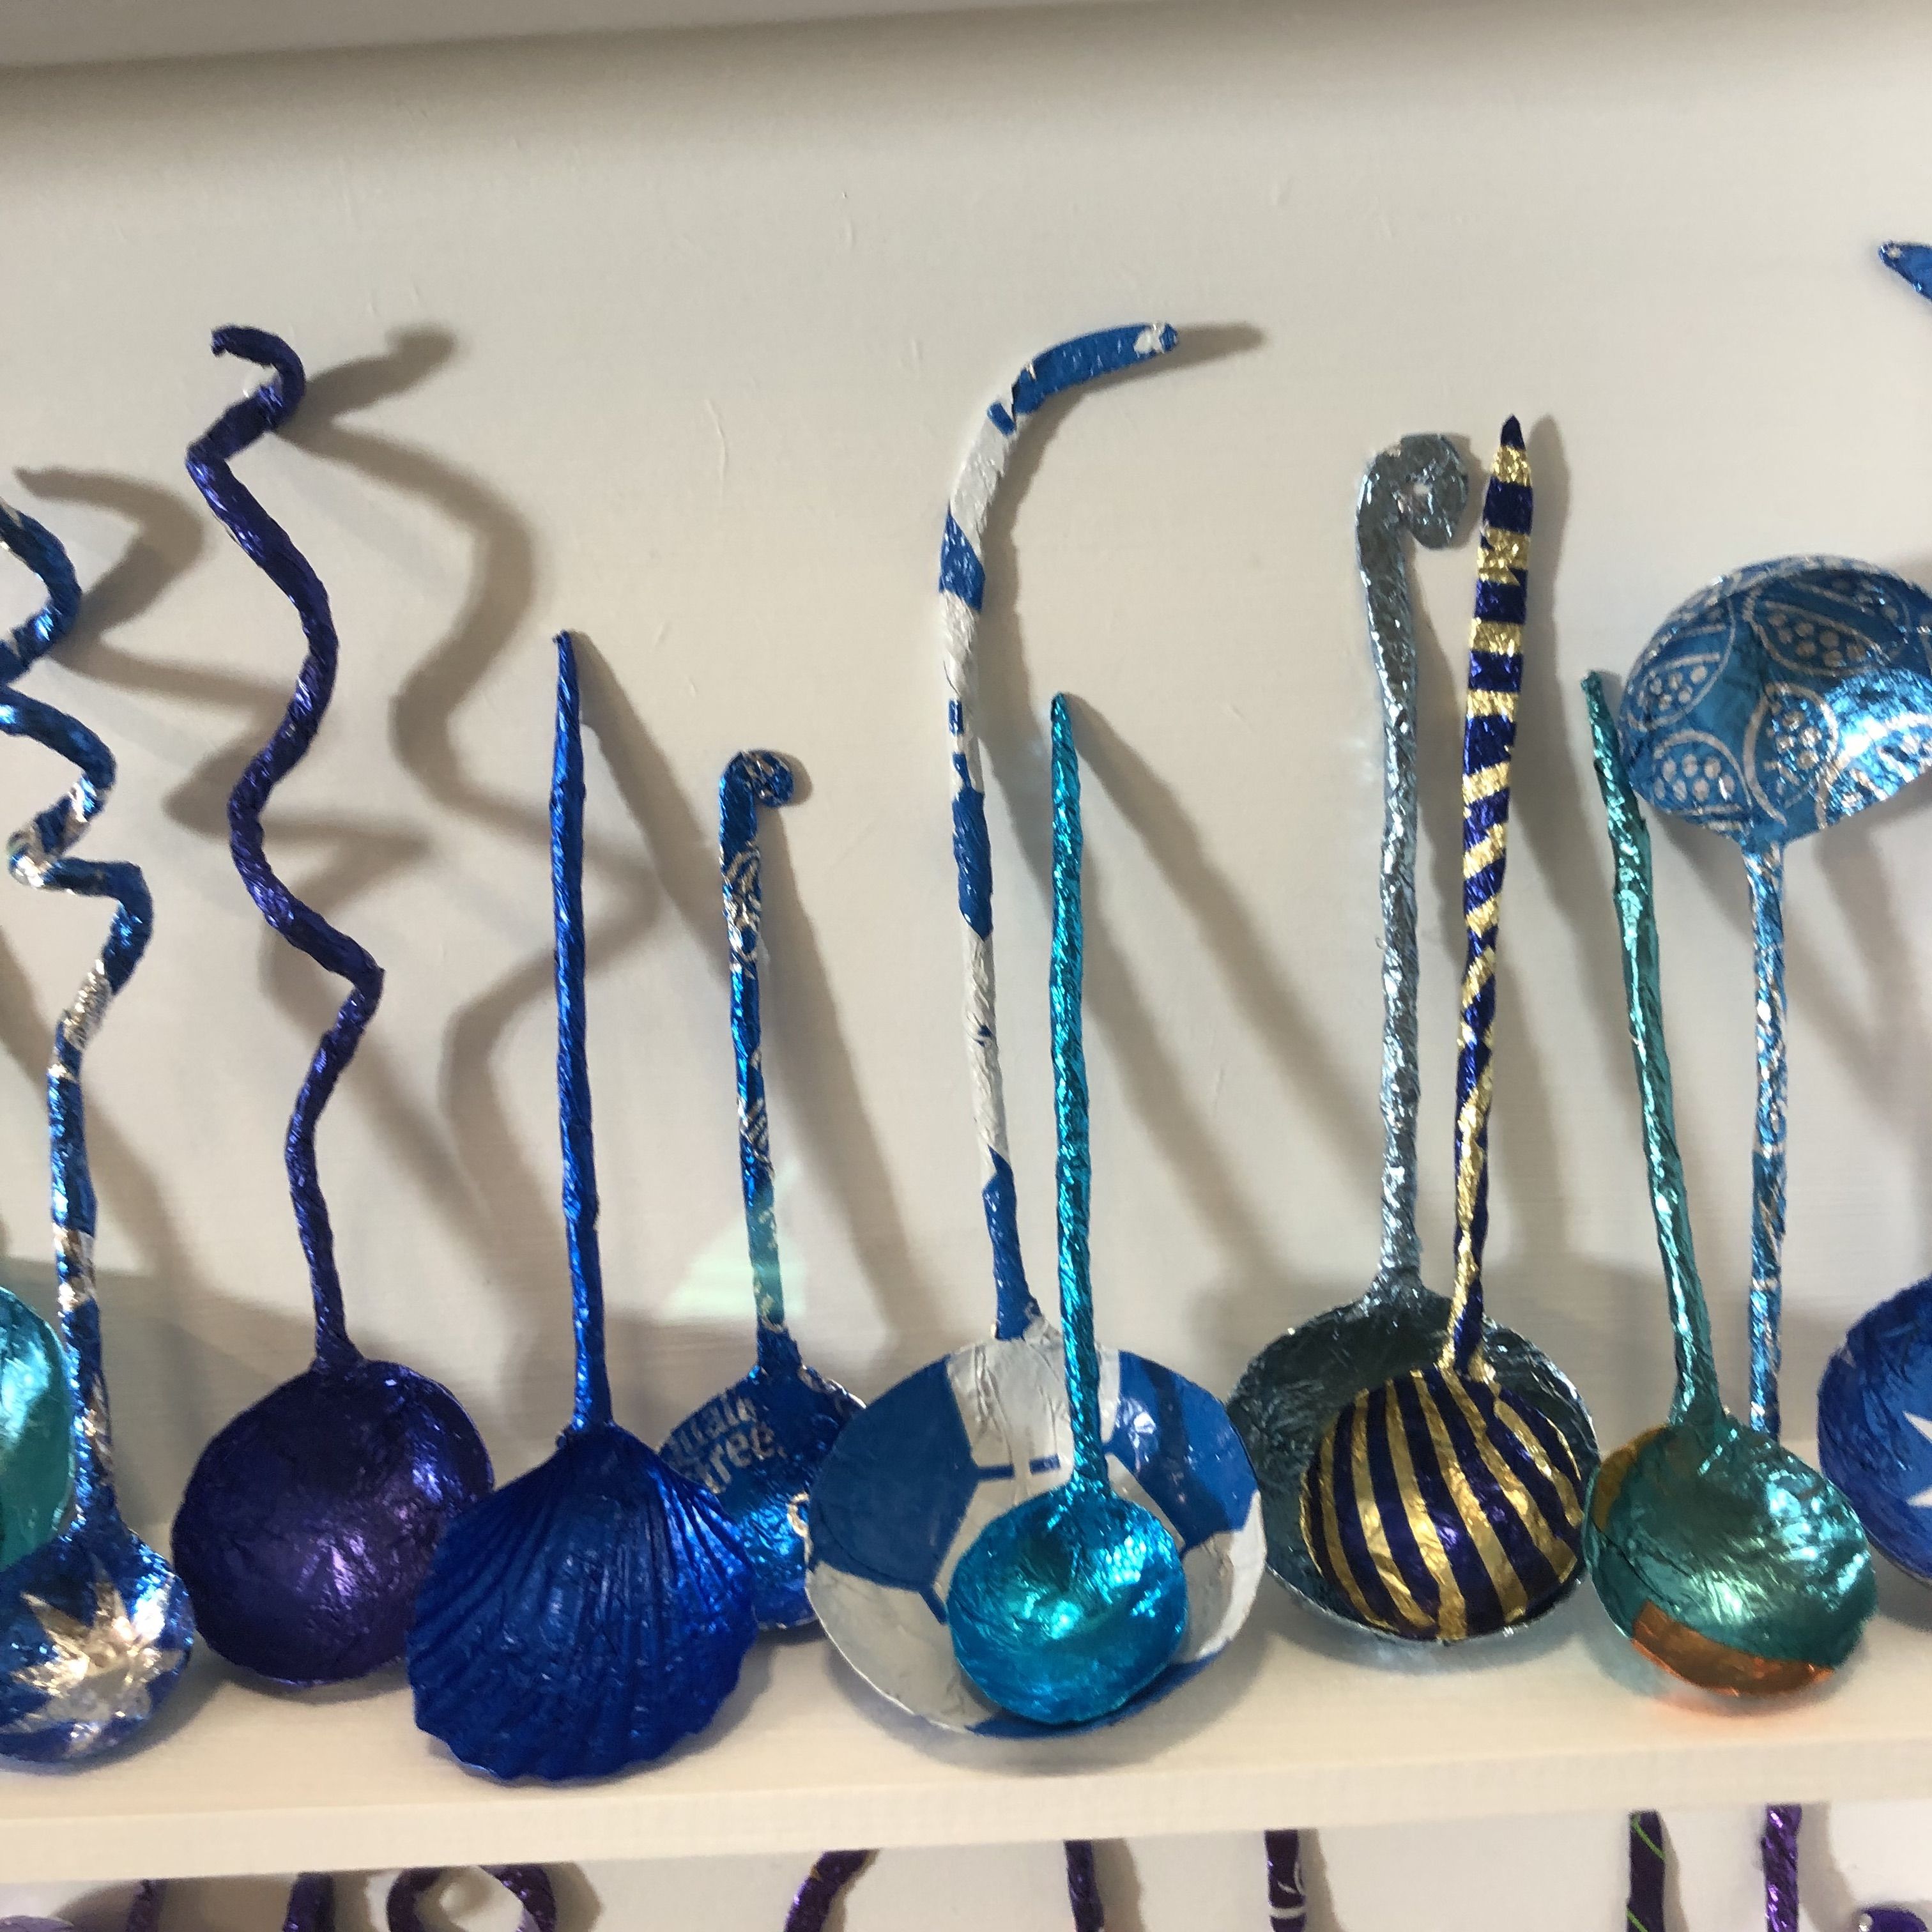 Resting Spoons by Joanne Tinker - Secondary Image